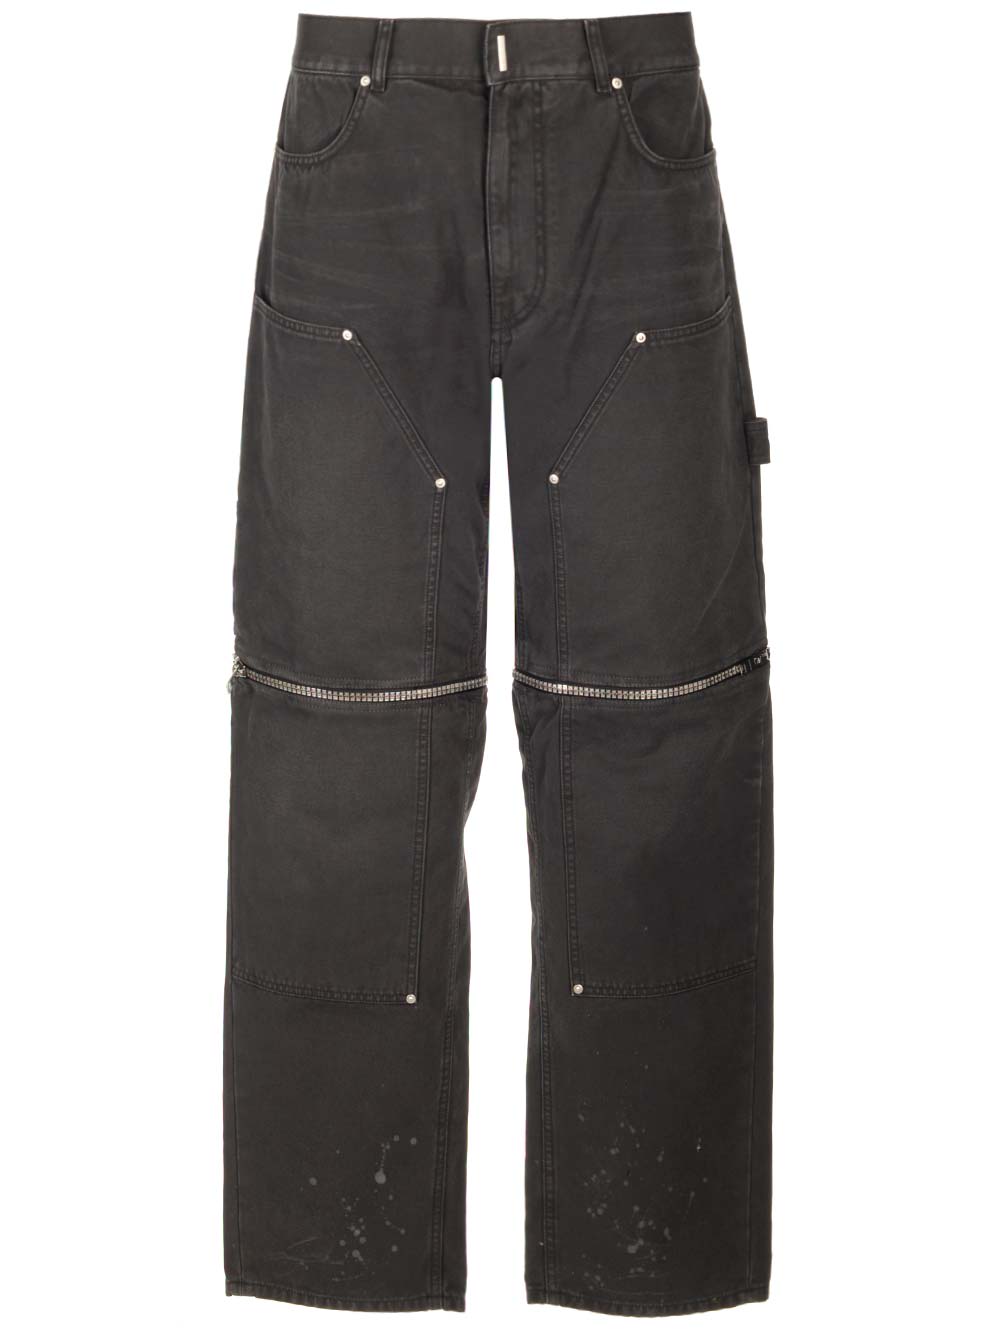 GIVENCHY ZIP DETAILED JEANS